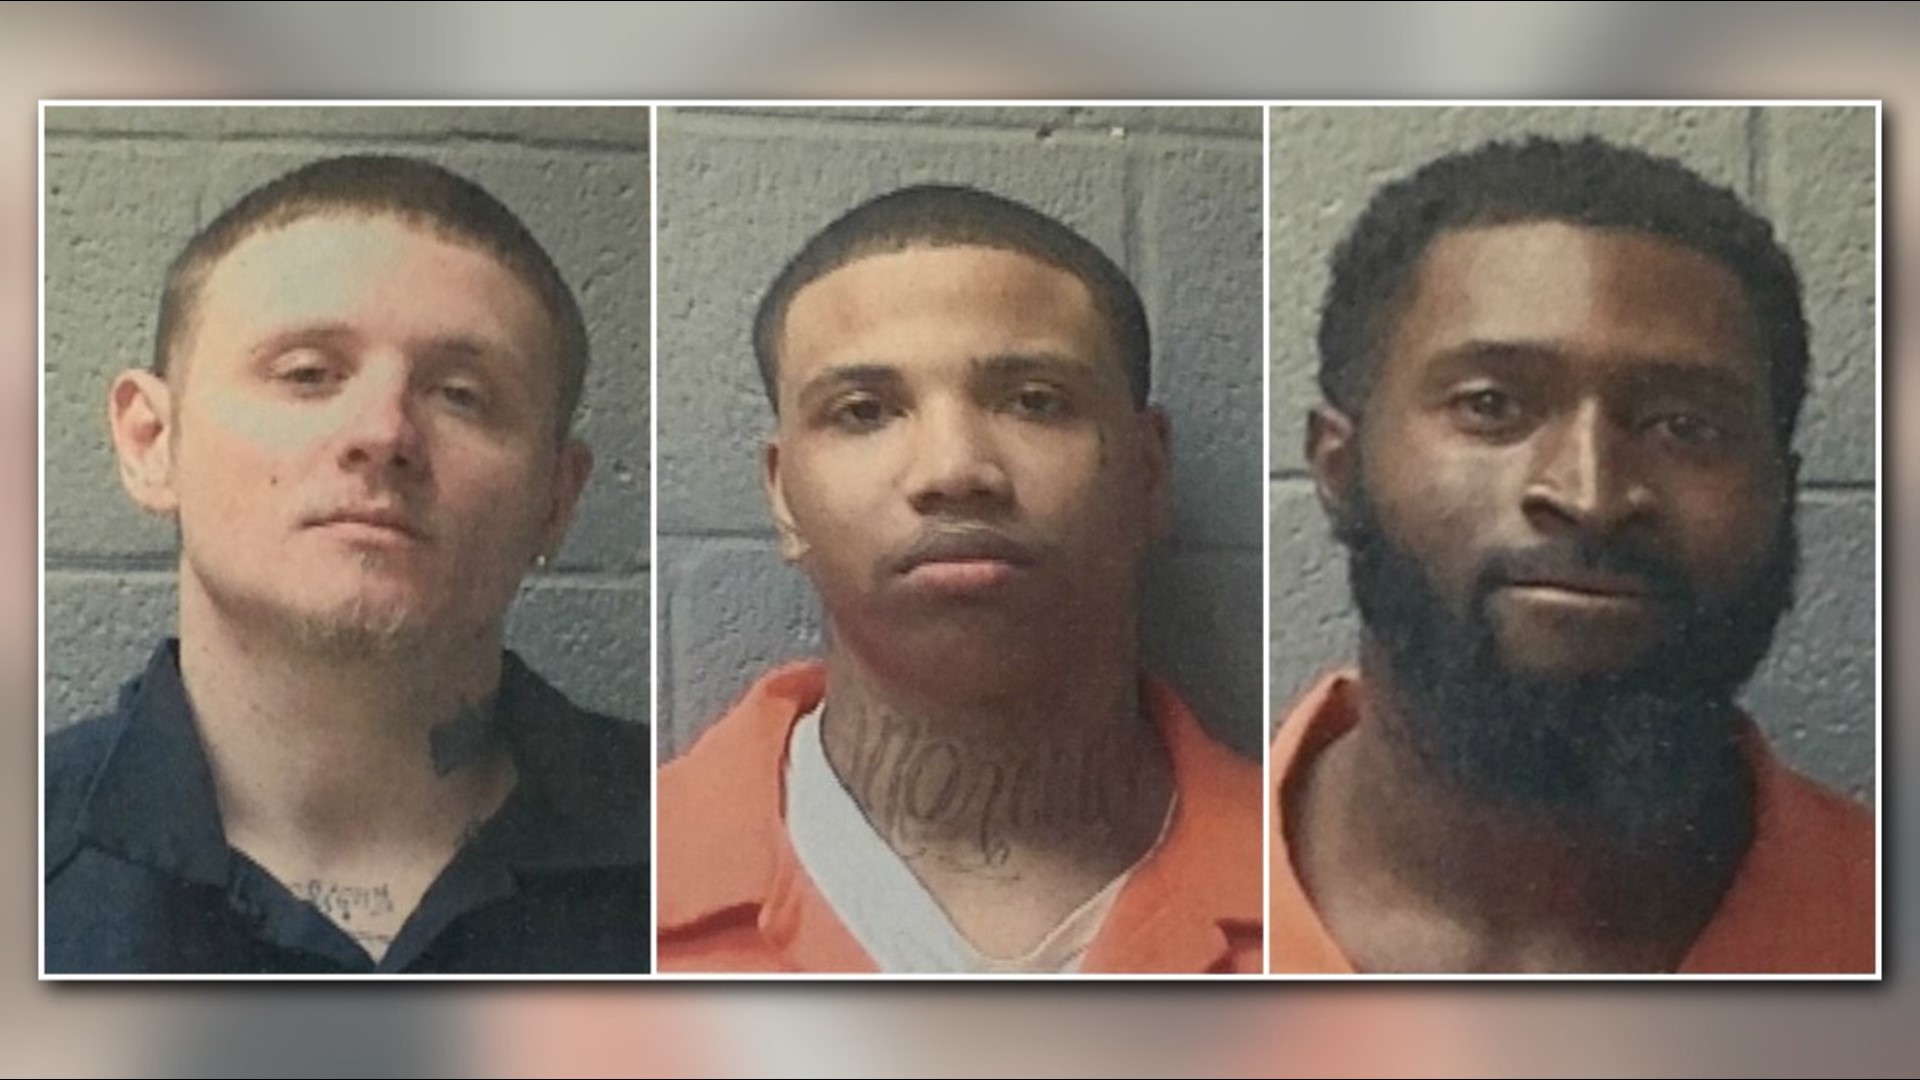 Search On For 'Dangerous' Inmates Who Escaped From SC Jail